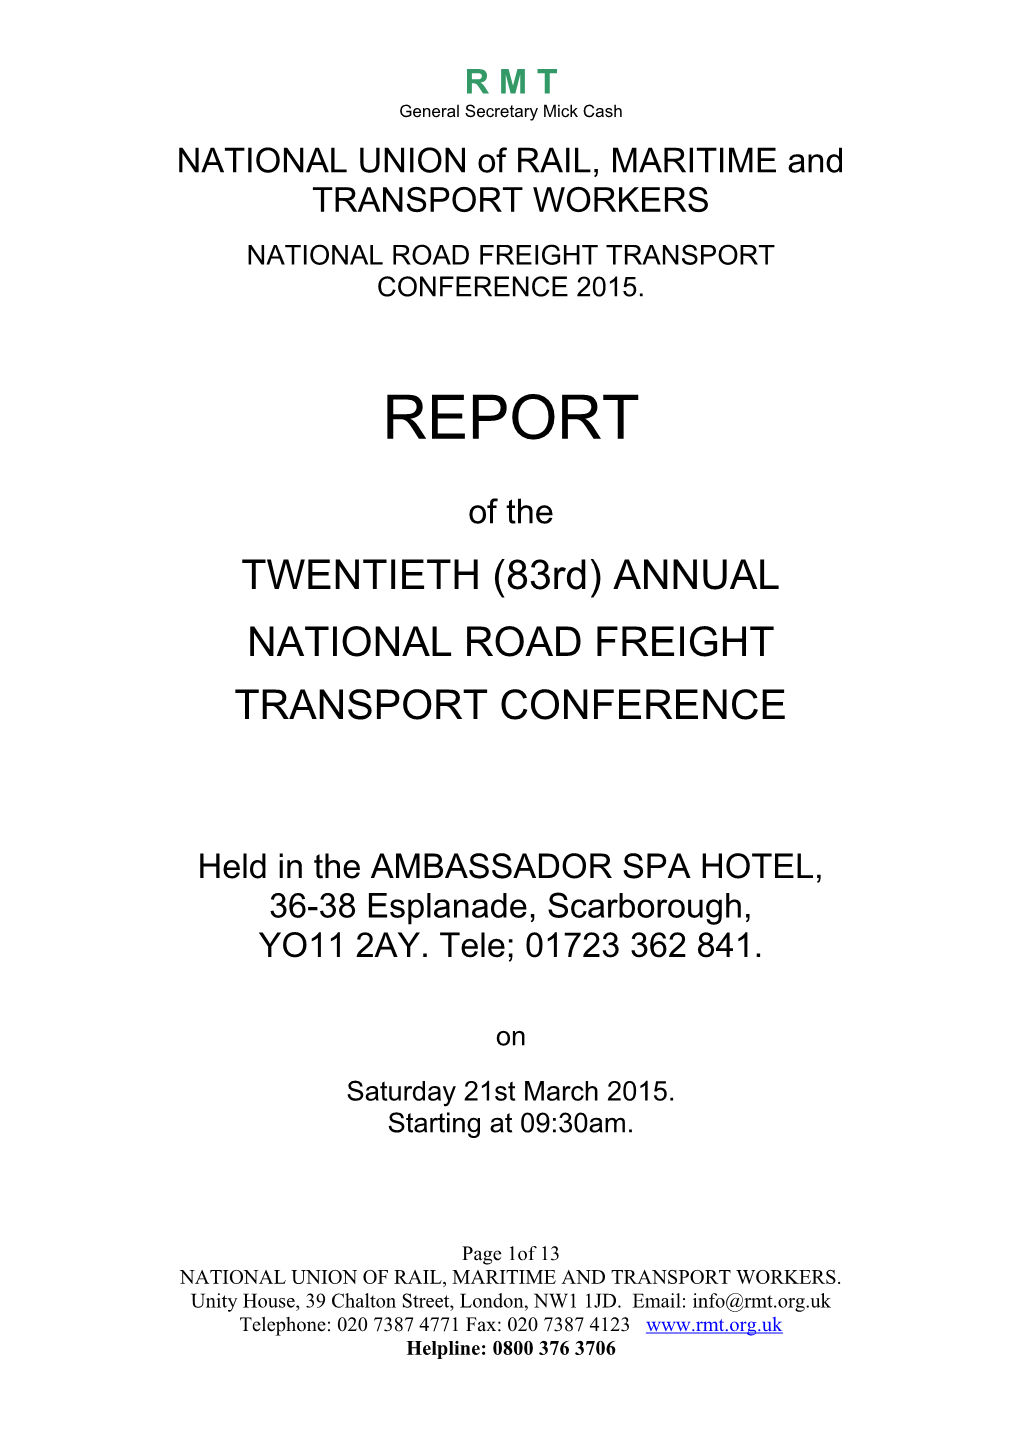 National Road Freight Transport Conference 2011